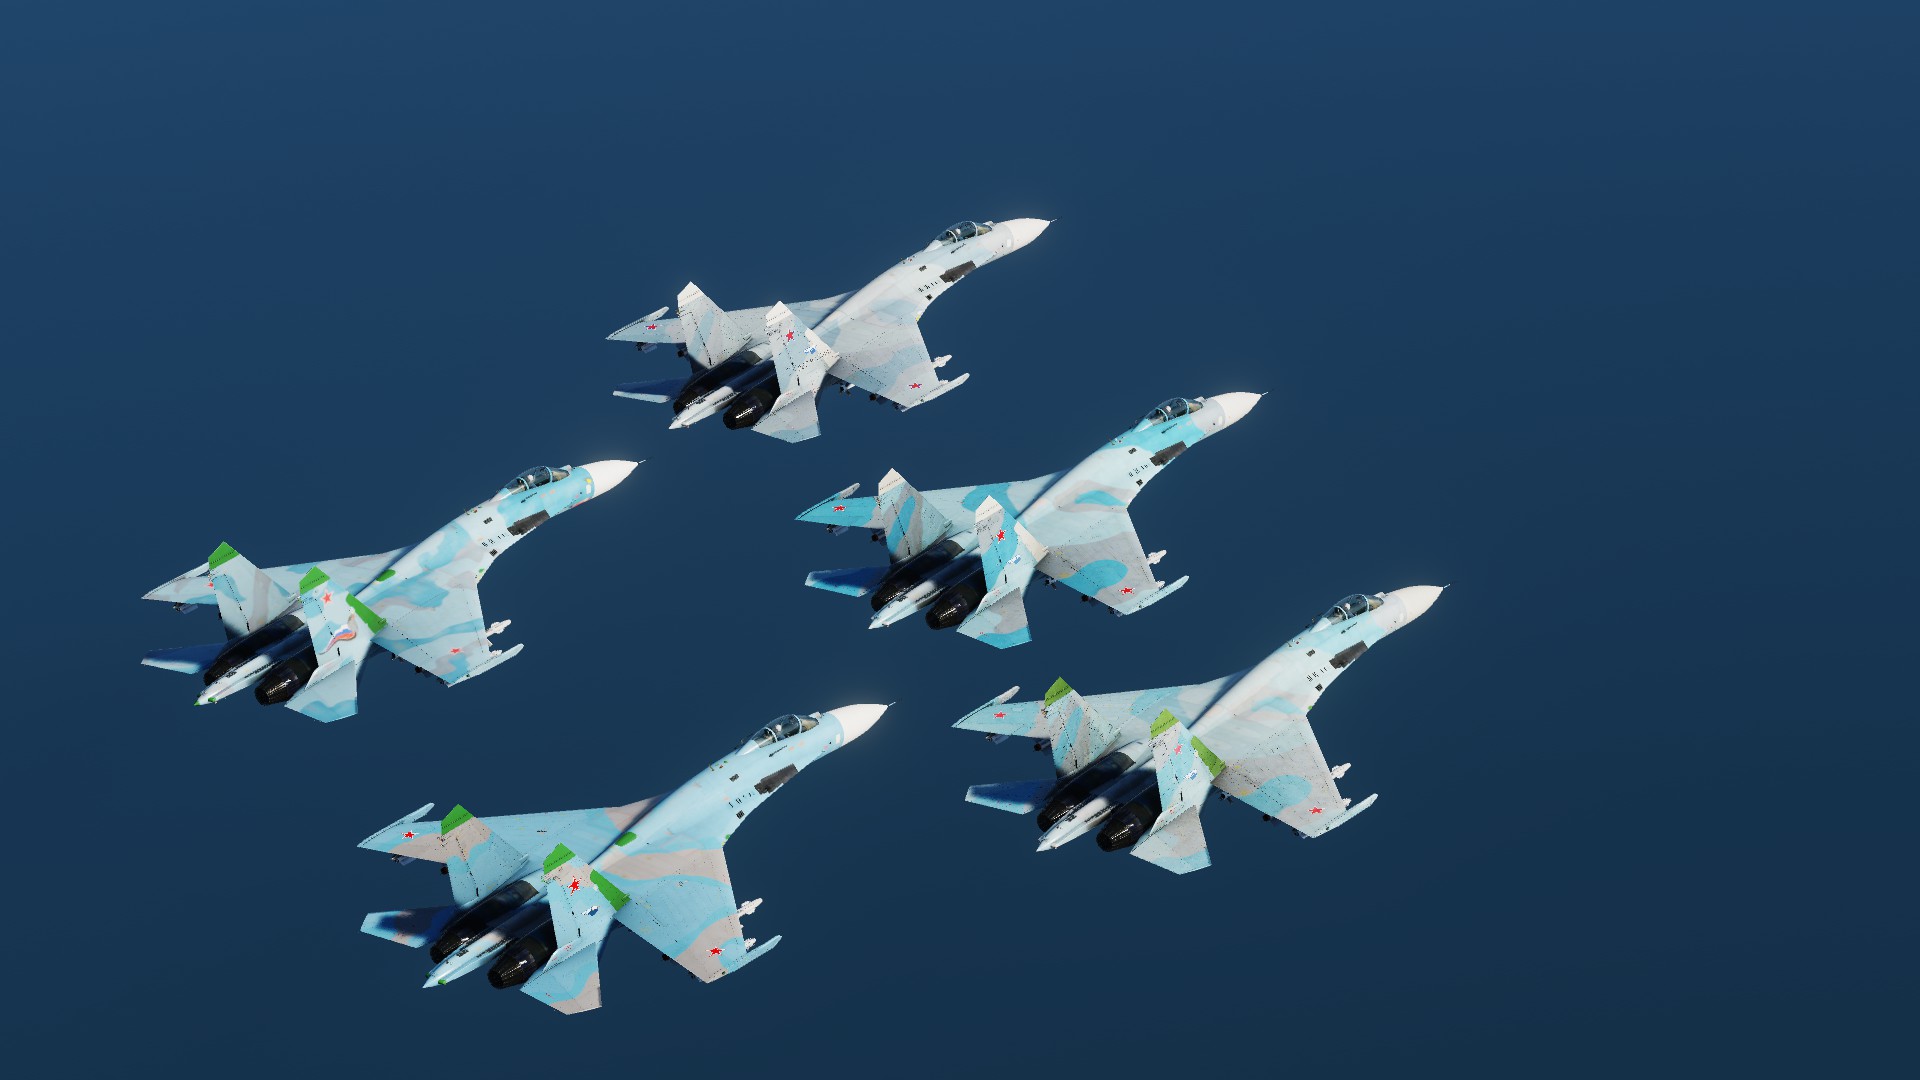 Russian Su-27 skins for the J-11A